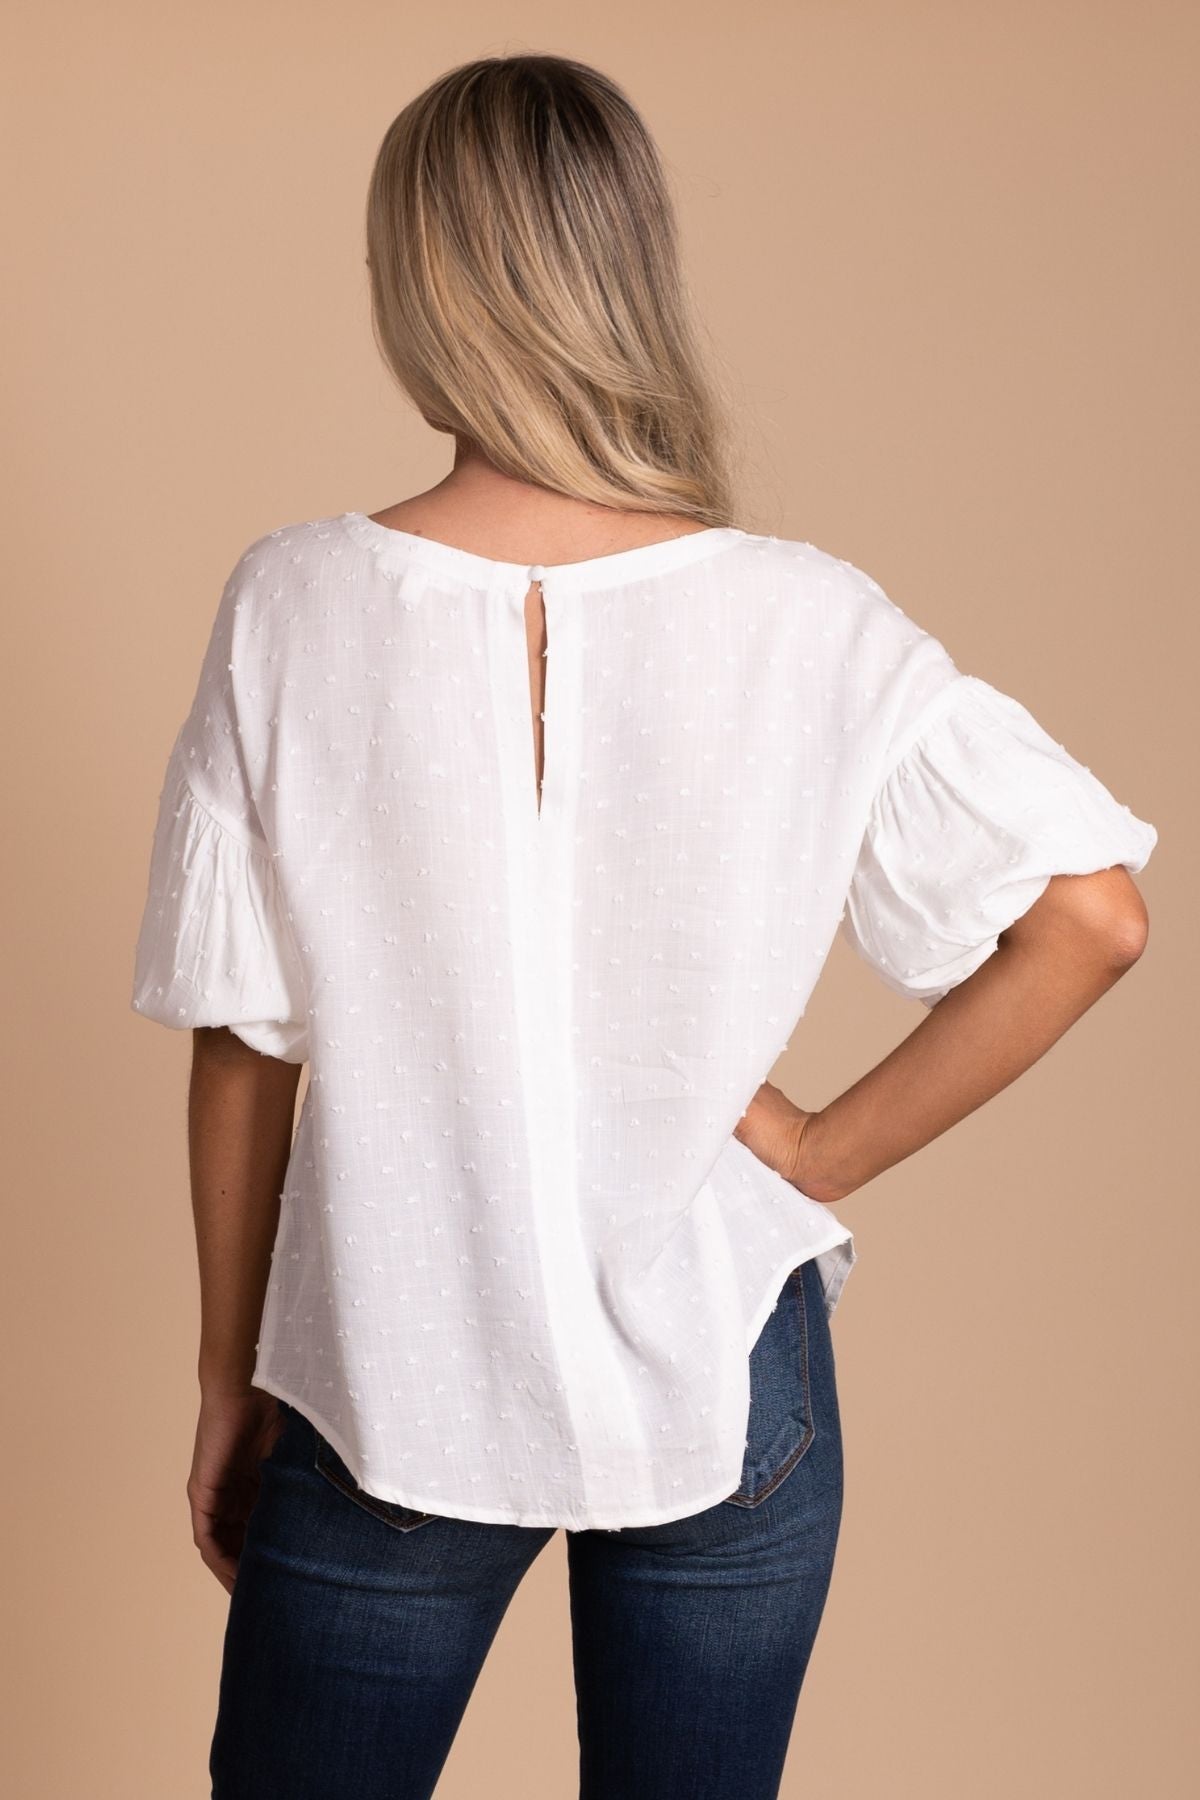 Women's Puff Sleeve White Boutique Top